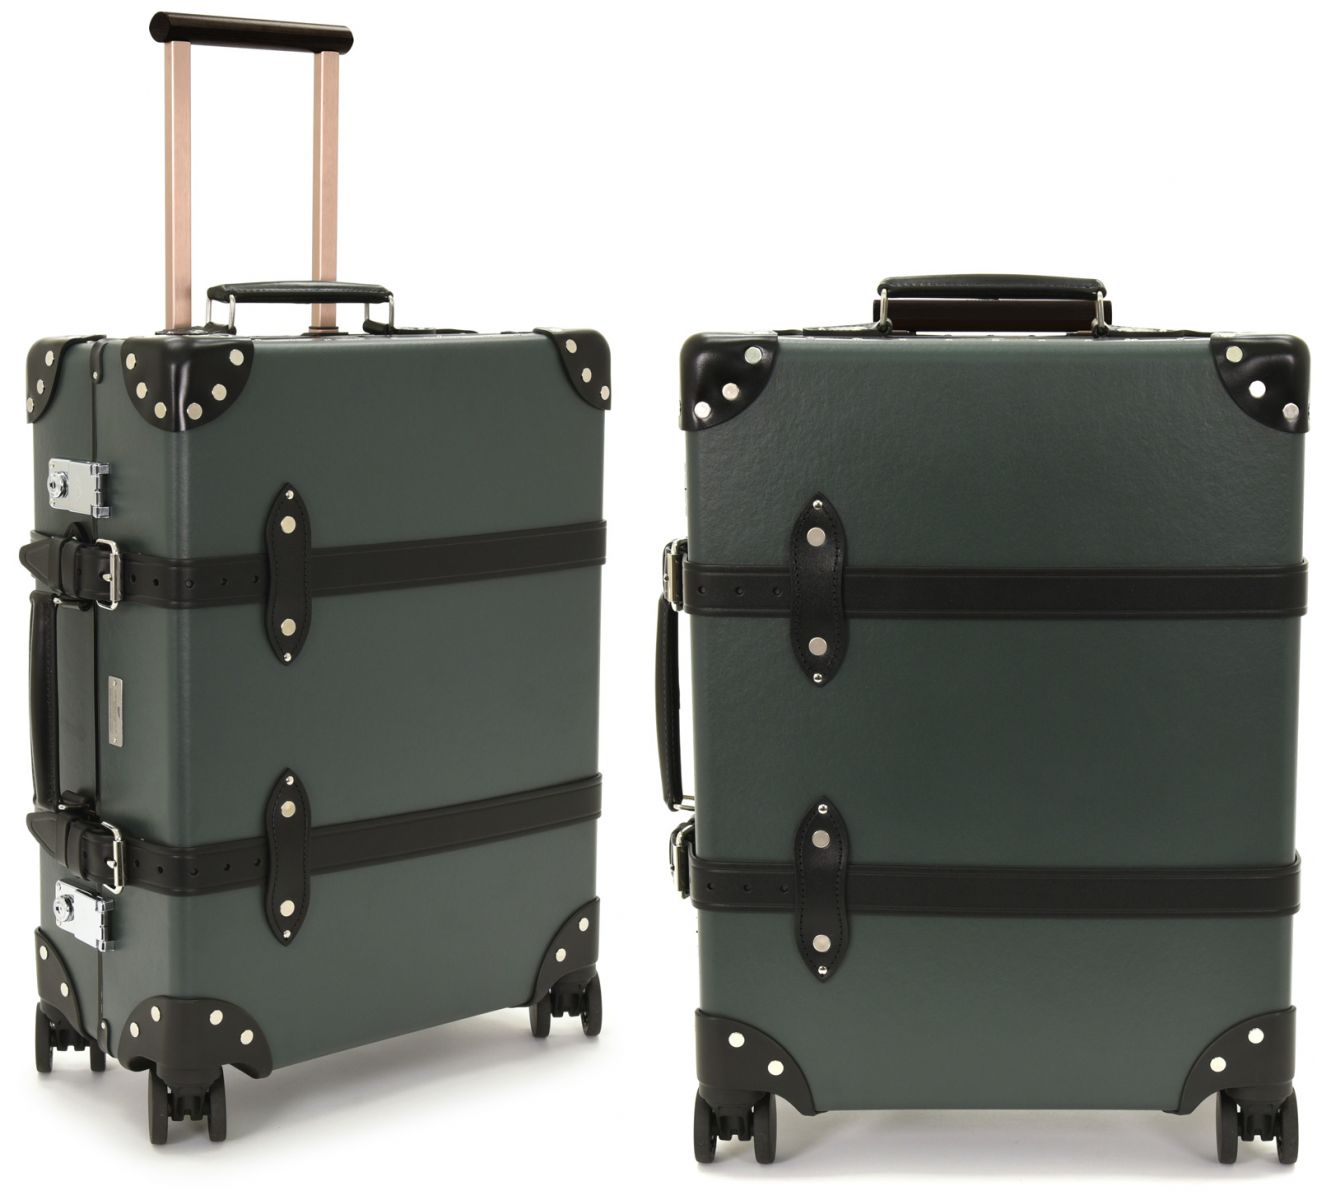 Globe-Trotter launches new No Time To Die Luggage collection | Bond